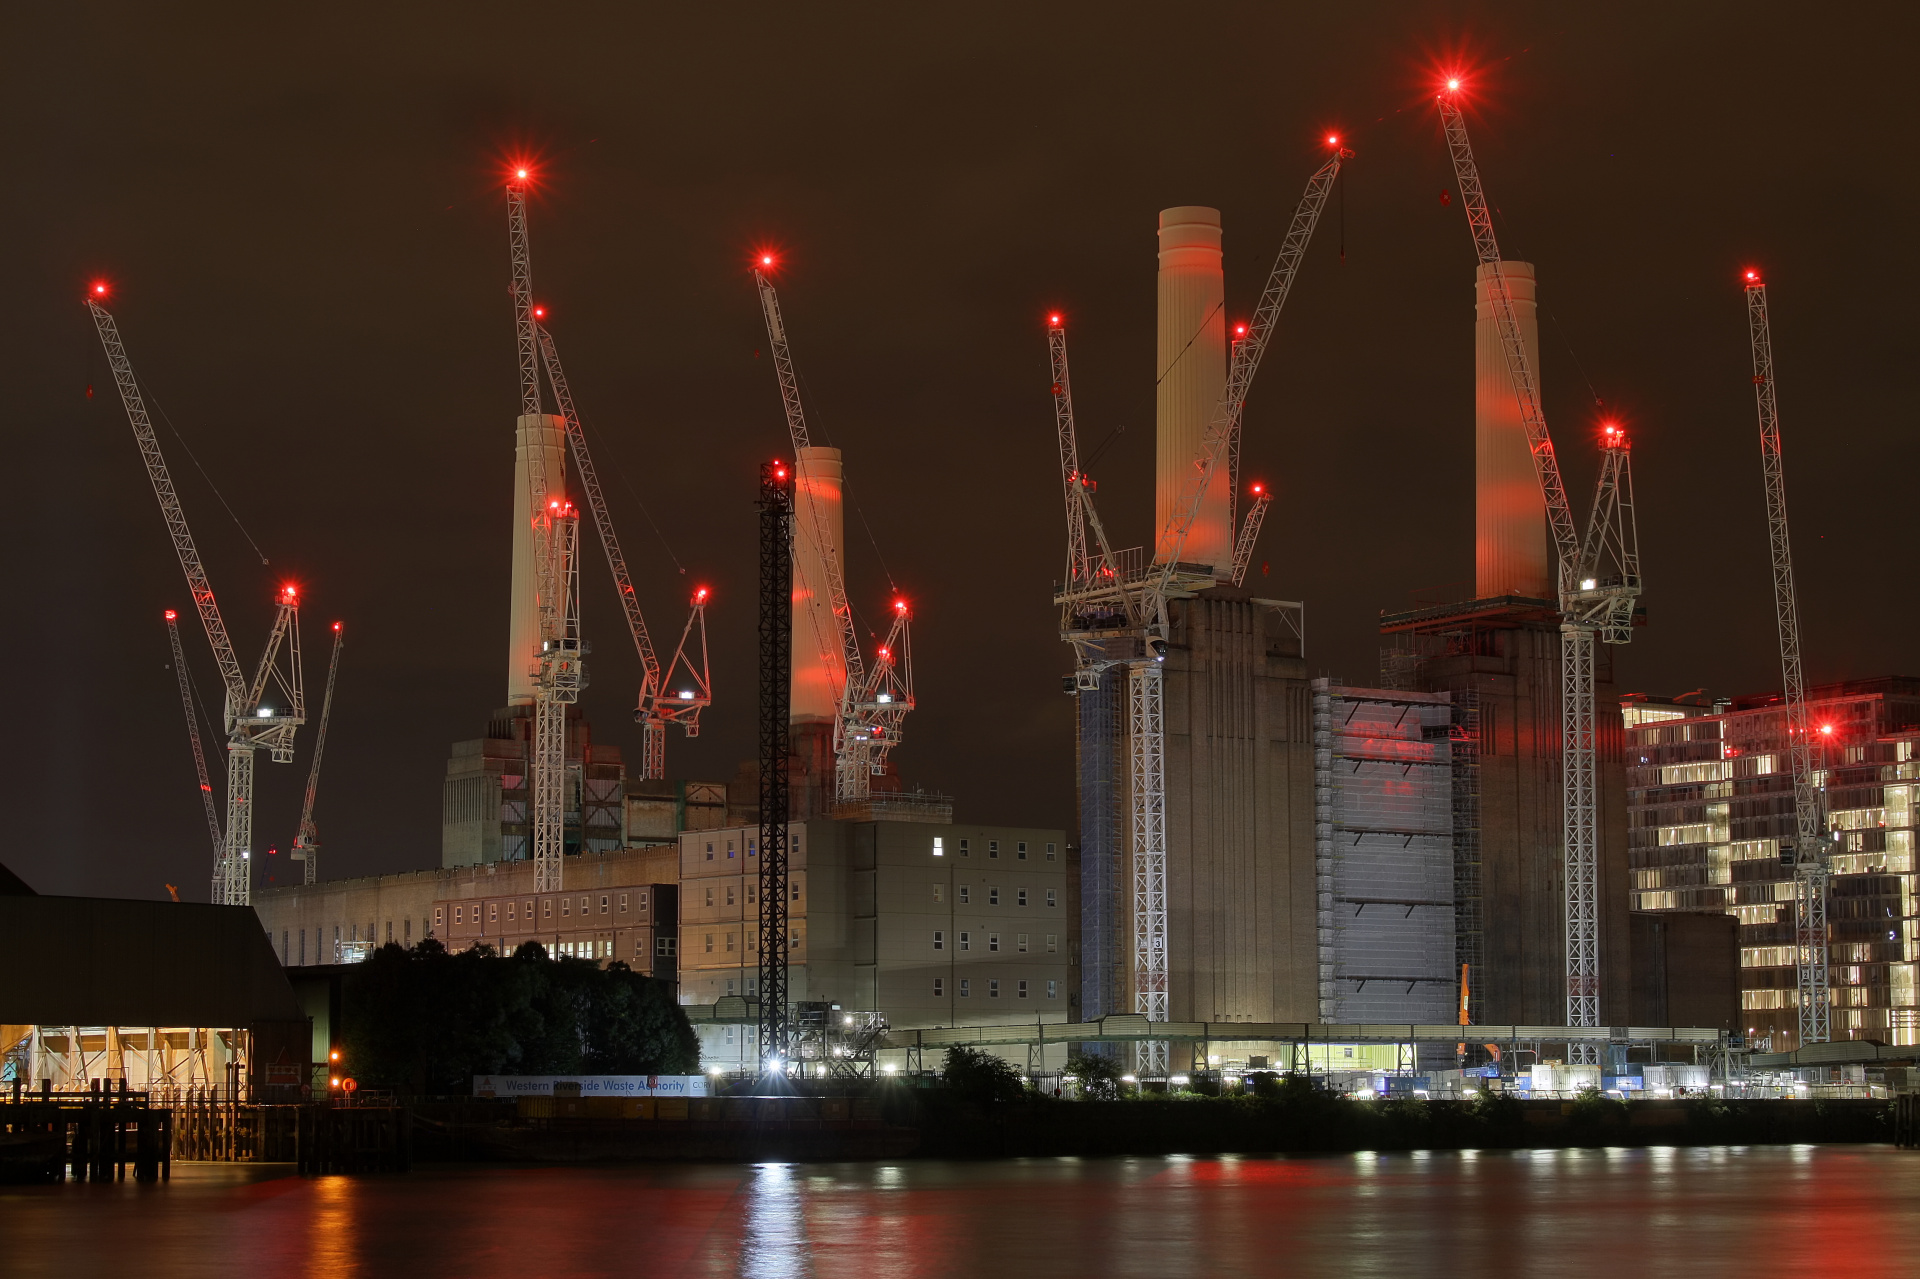 Battersea Power Station with chimneys completed (Travels » London » London at Night)